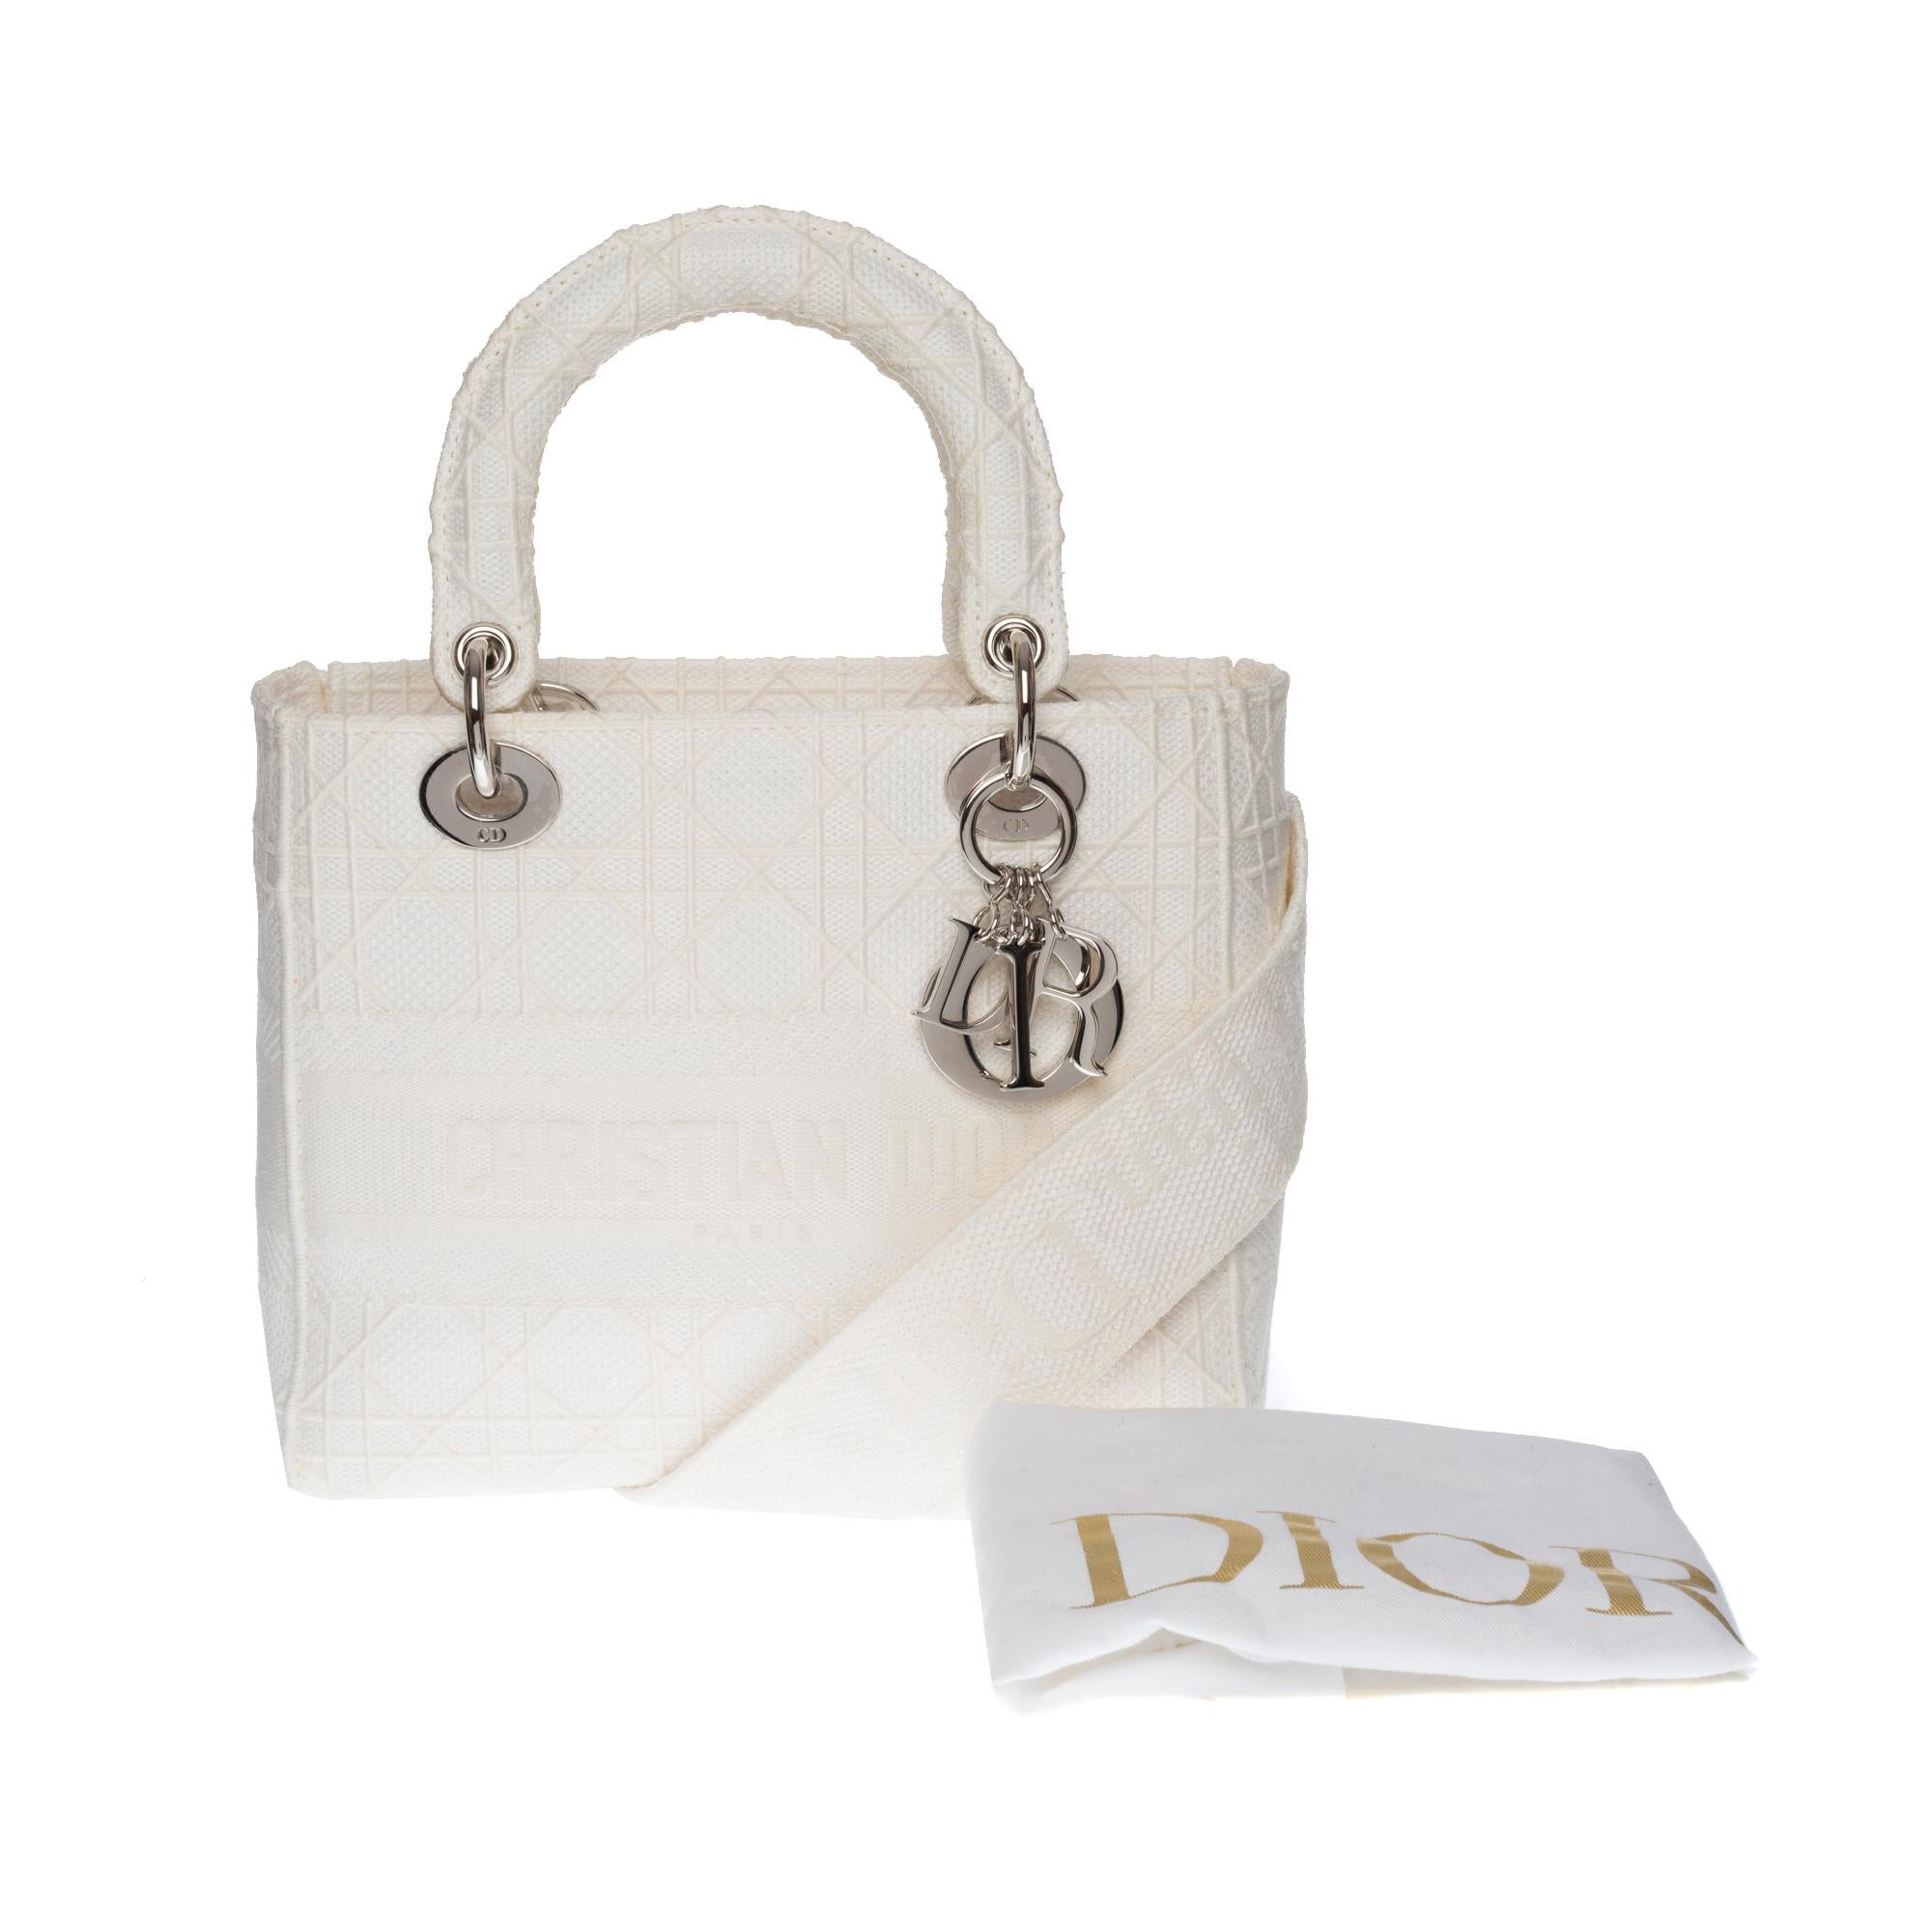 Limited Edition Lady Dior MM D-Lite in white Tweed, SHW 5